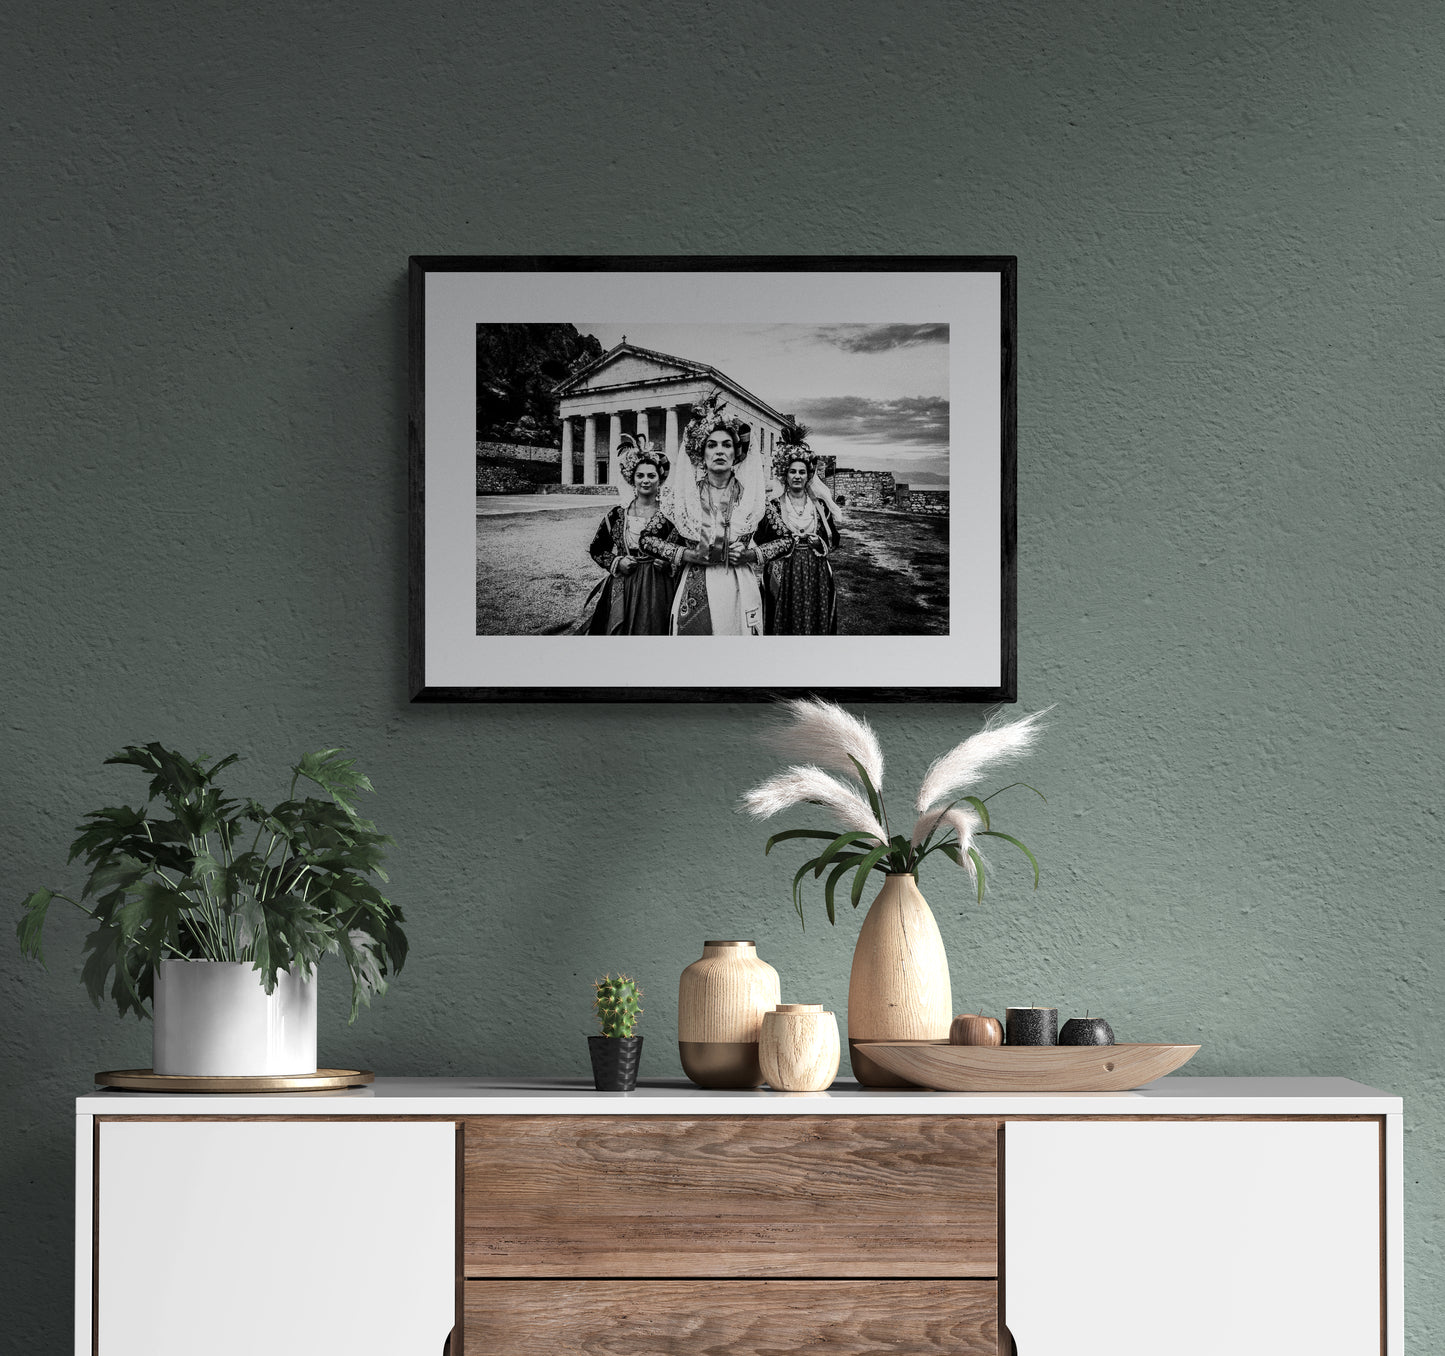 Black and White Photography Wall Art Greece | Costumes of central Corfu island at the Old Fortress Ionian Sea by George Tatakis - single framed photo